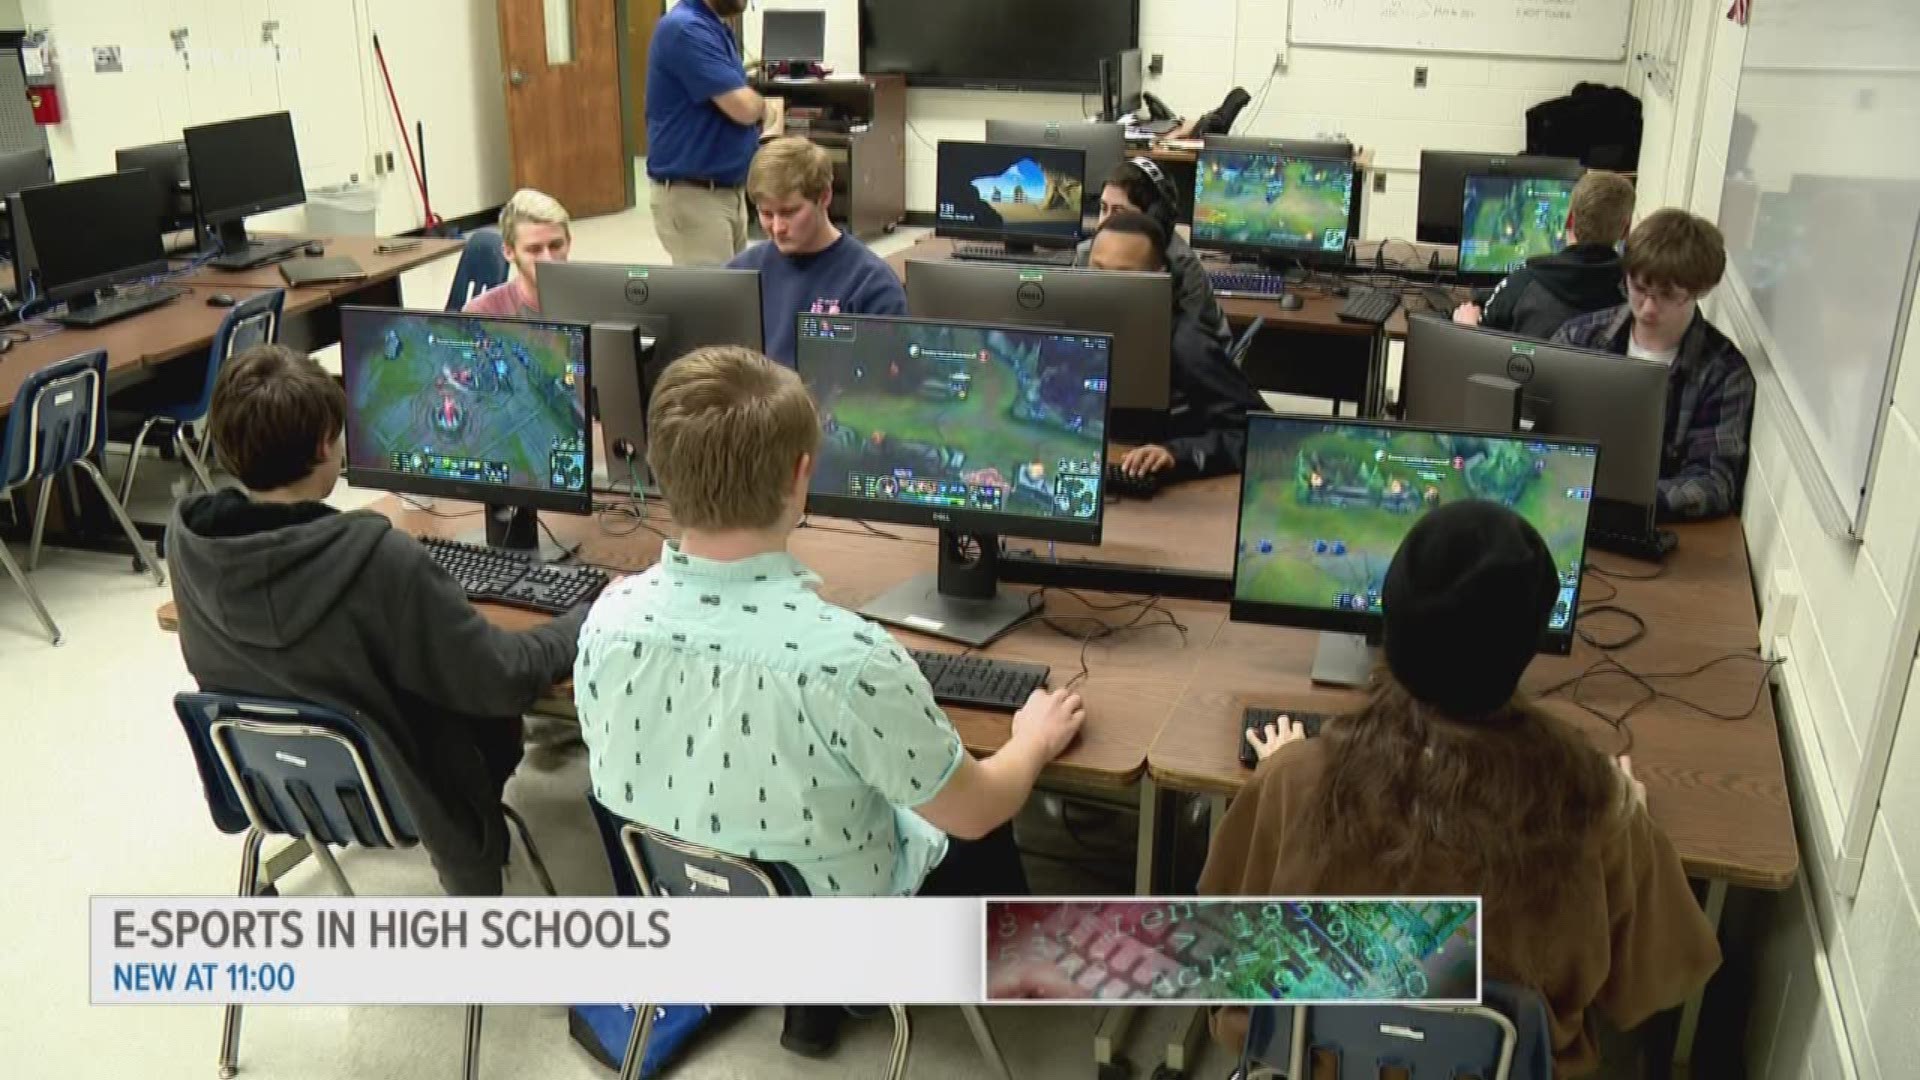 One teacher said these kids aren’t just playing games after school. They learn marketable skills like computer software, hardware, and other avenues of technology.